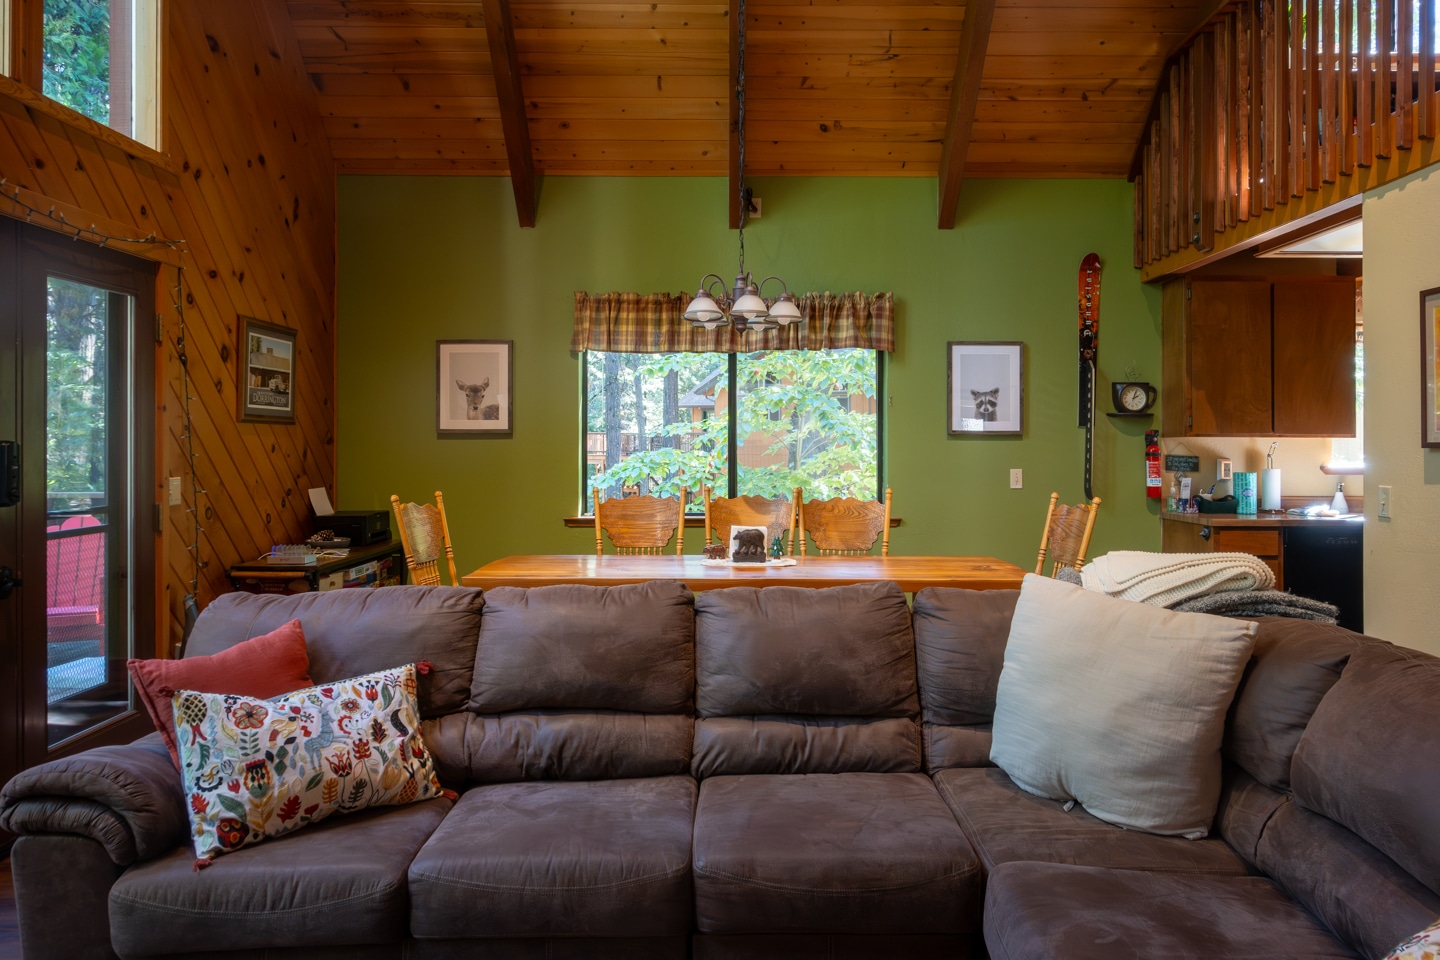 Dorrington Vacation Rental Cabins - A brown couch in a living room.